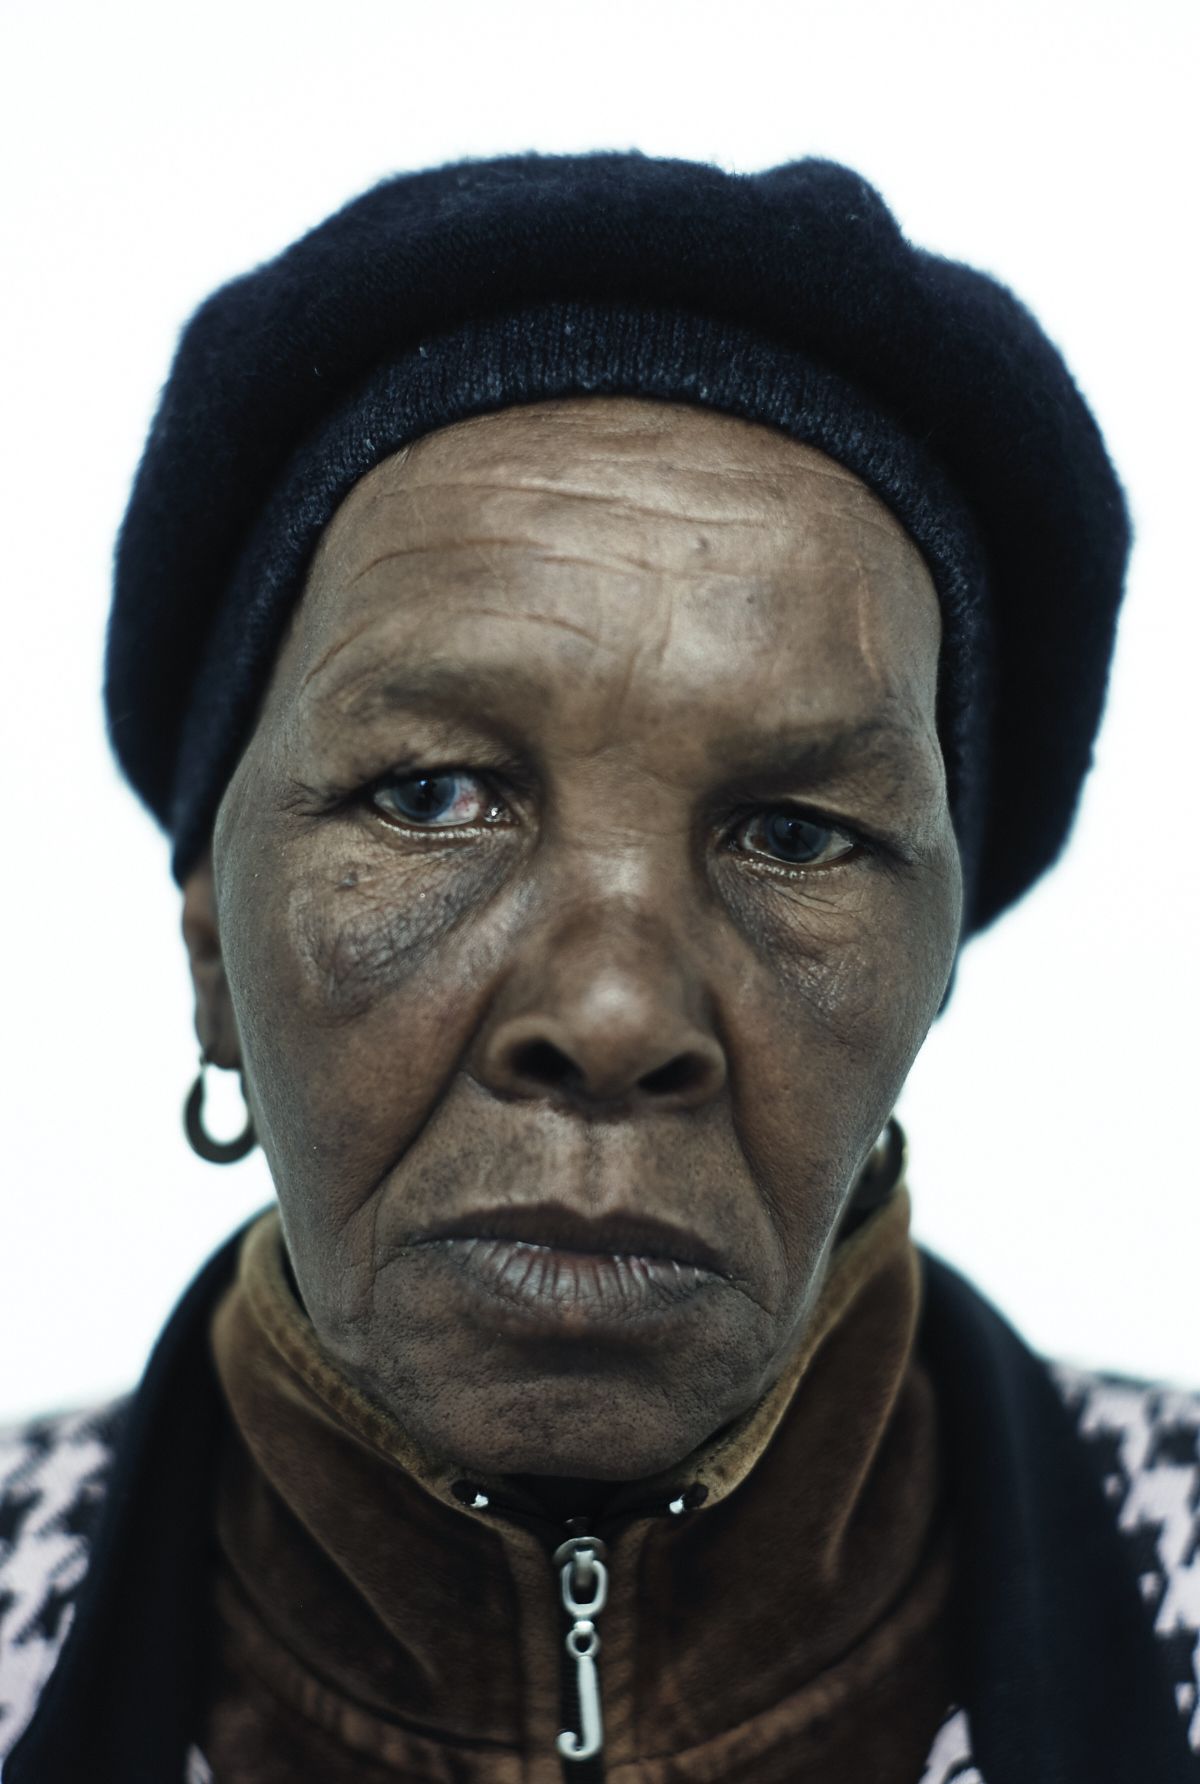 Orianda during her frequent visits to the clinic for tuberculosis treatment. Image by Misha Friedman. South Africa, 2013.